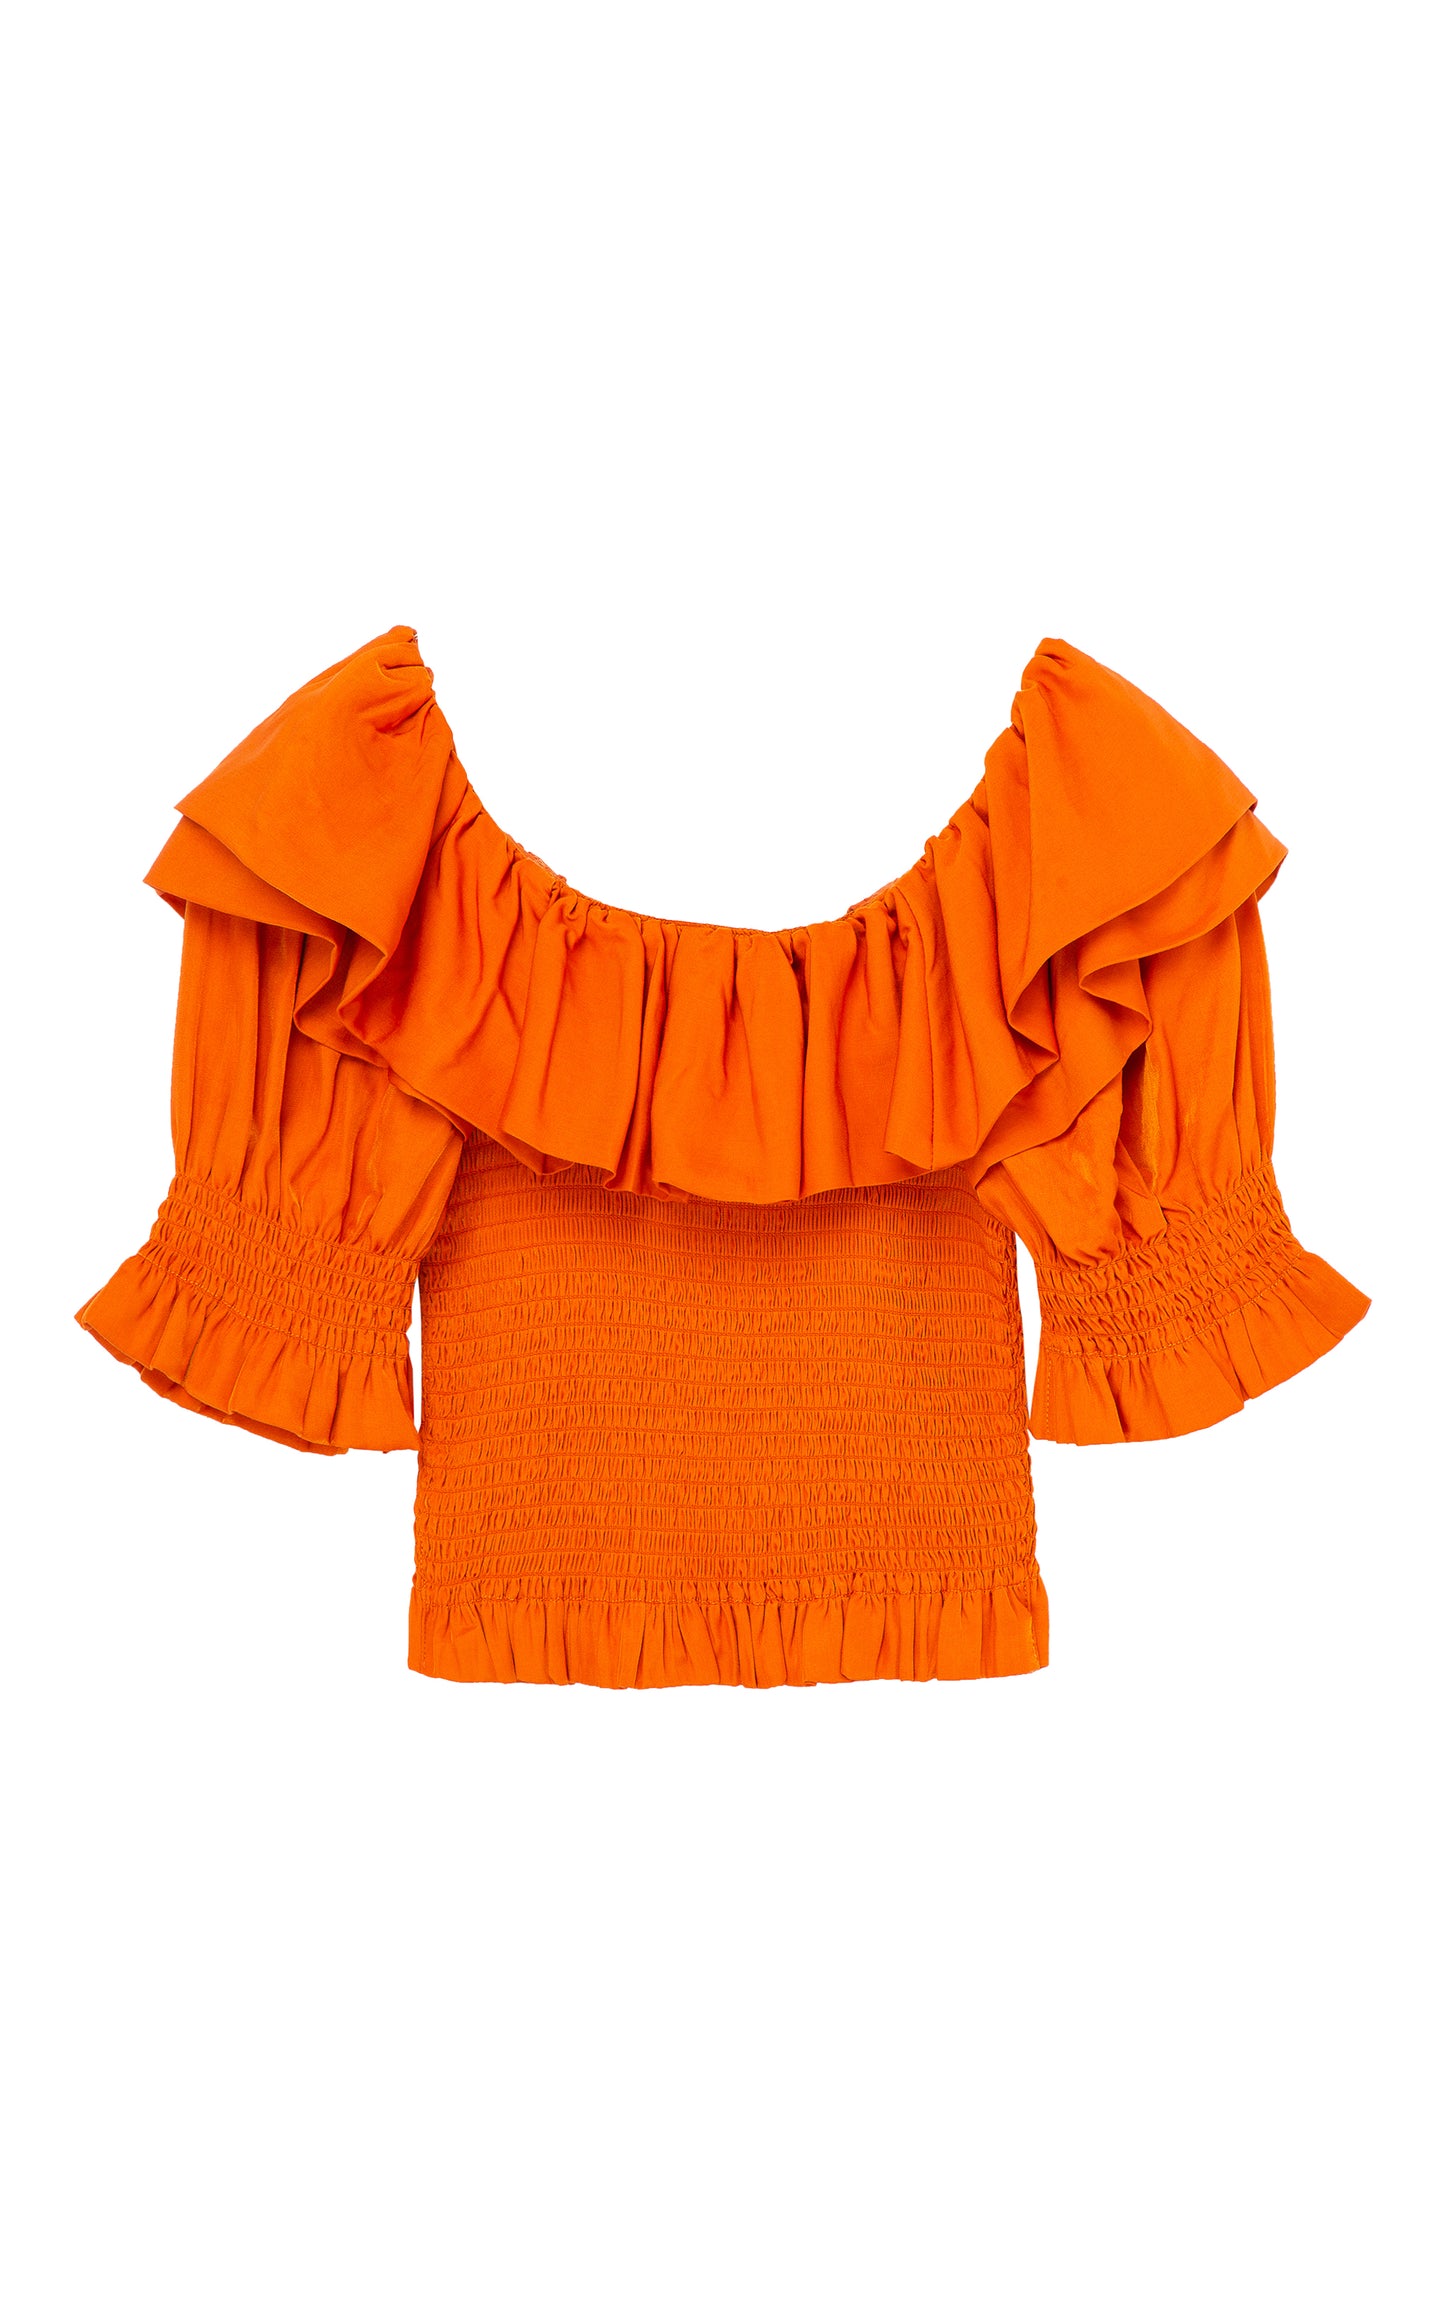 BACK OF ORANGE-RED THREE-QUARTER-LENGTH SLEEVE TOP WITH A WIDE RUFFLED NECKLINE AND A SMOCKED BODICE